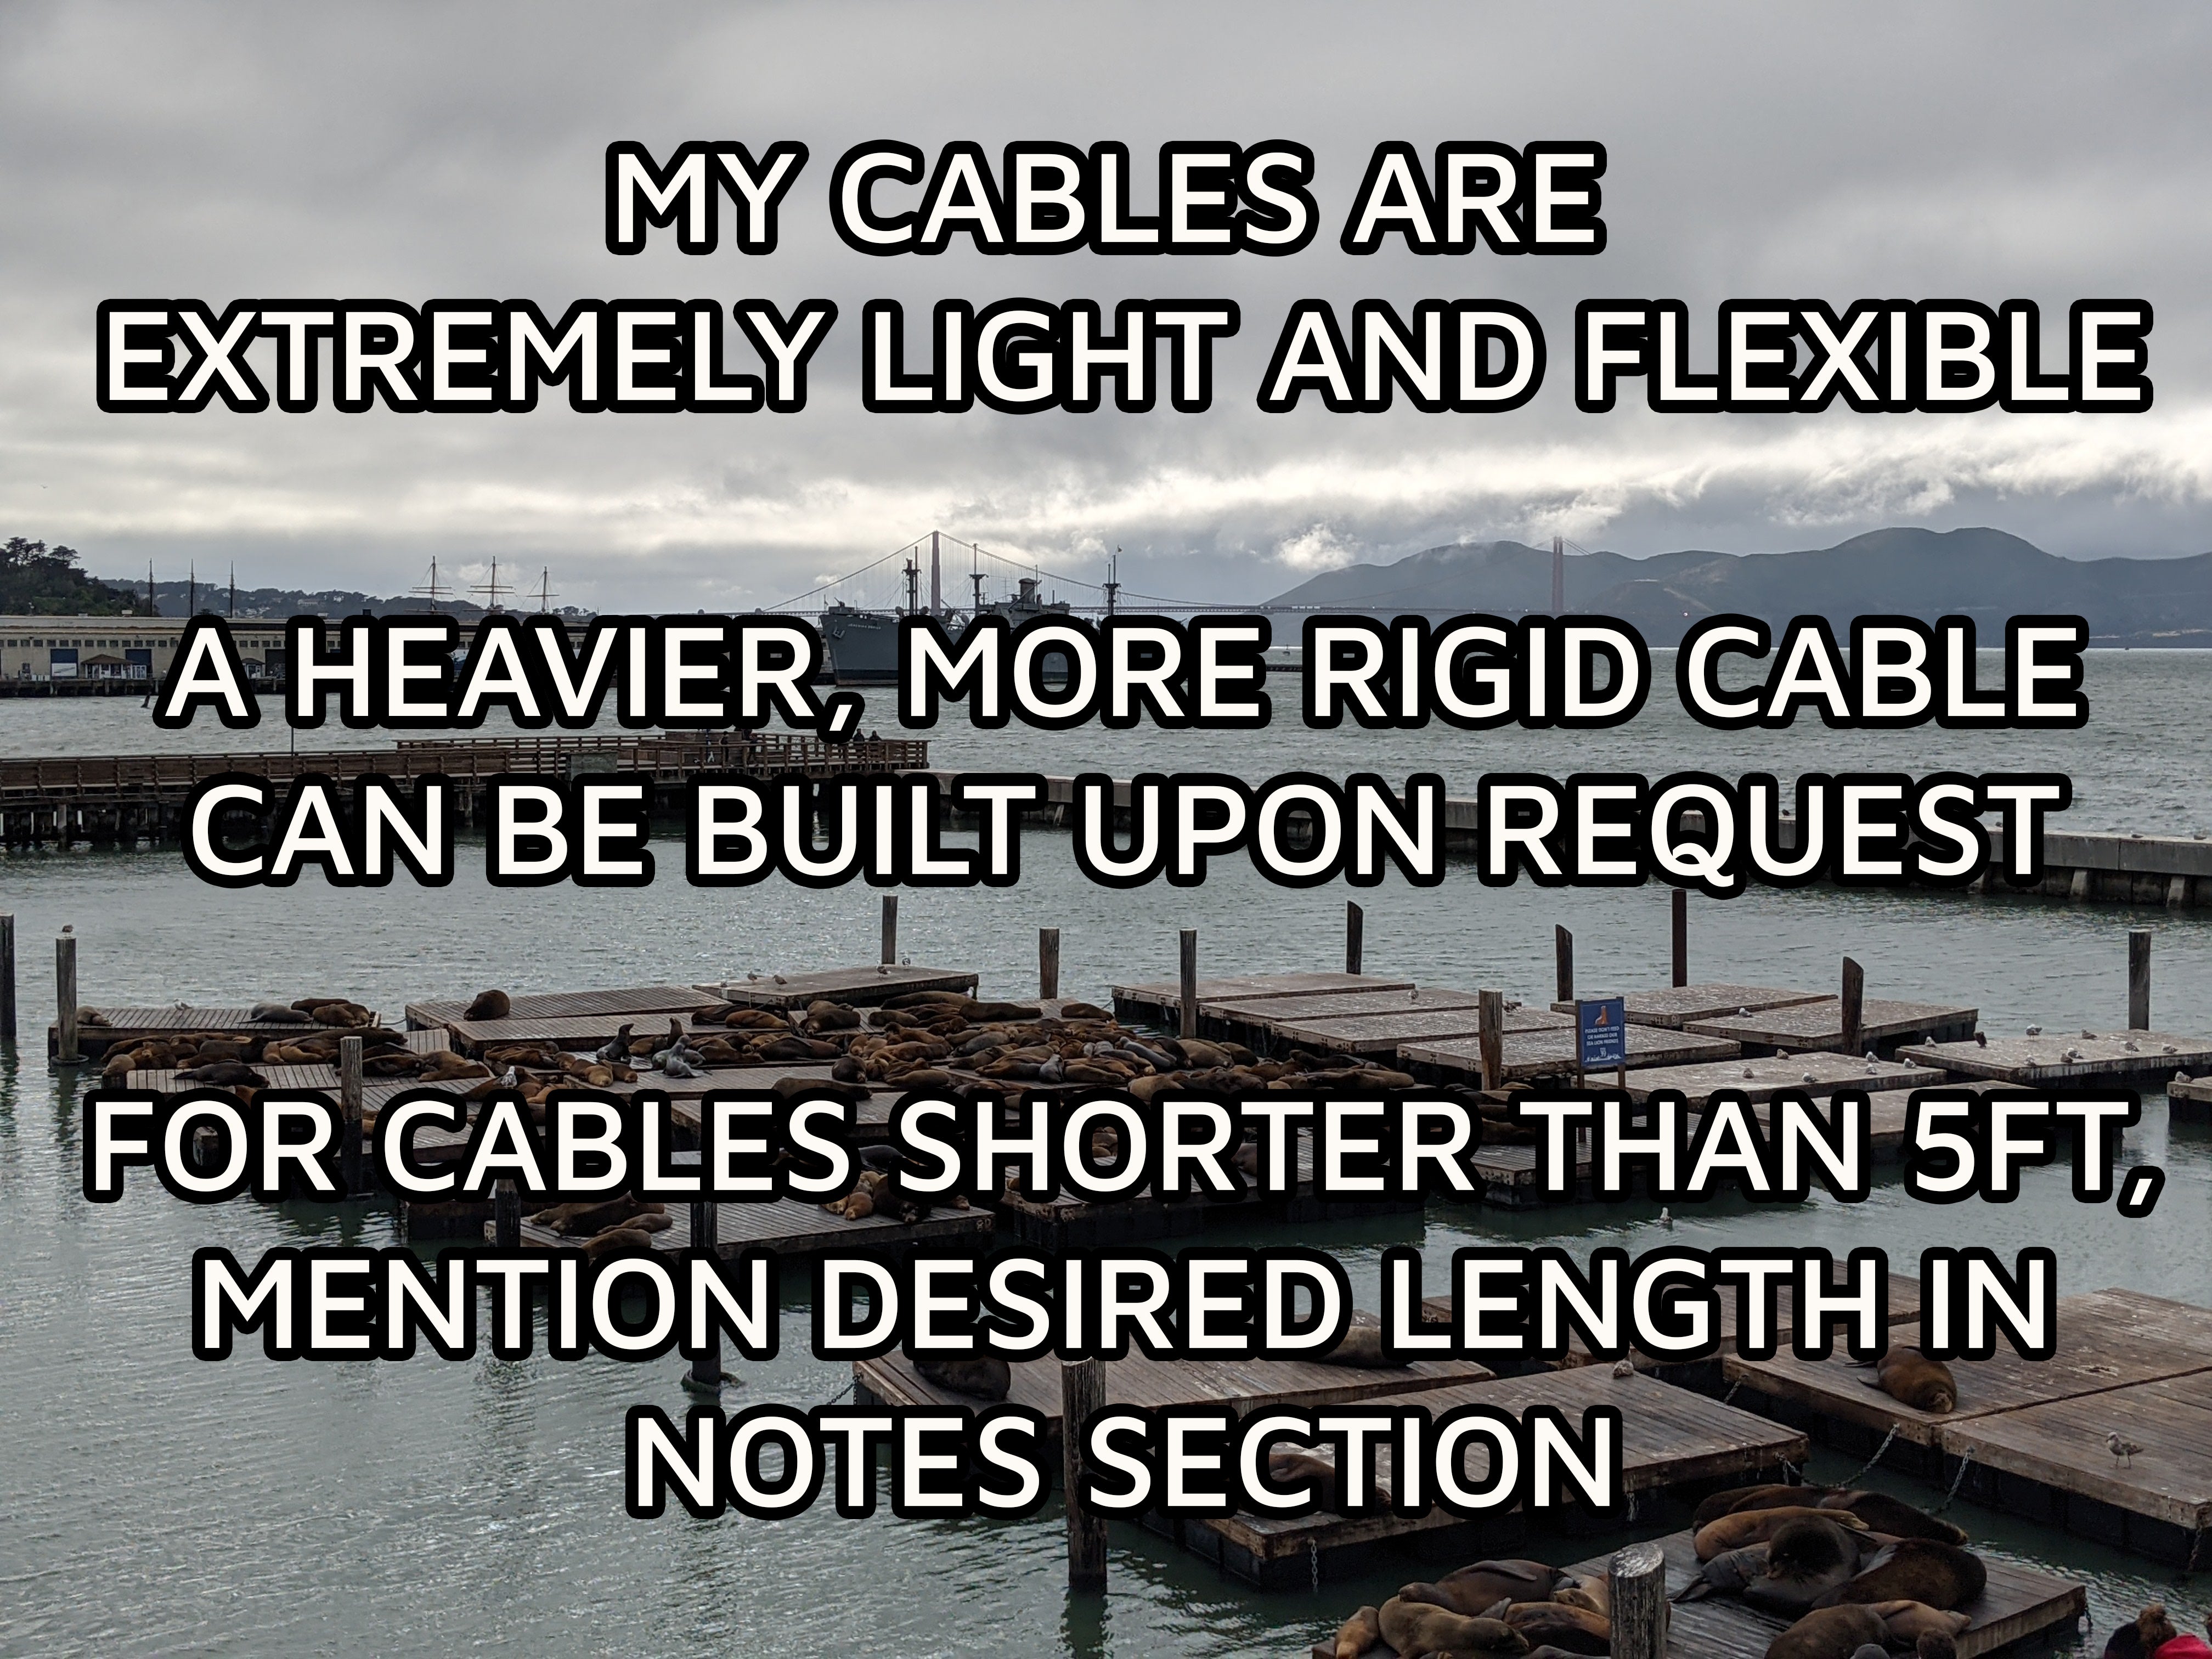 My cables are extremely light and flexible.  A heavier, more rigid cable can be built upon request.  For cables shorter than 5 foot, mention desired length in the notes section.  